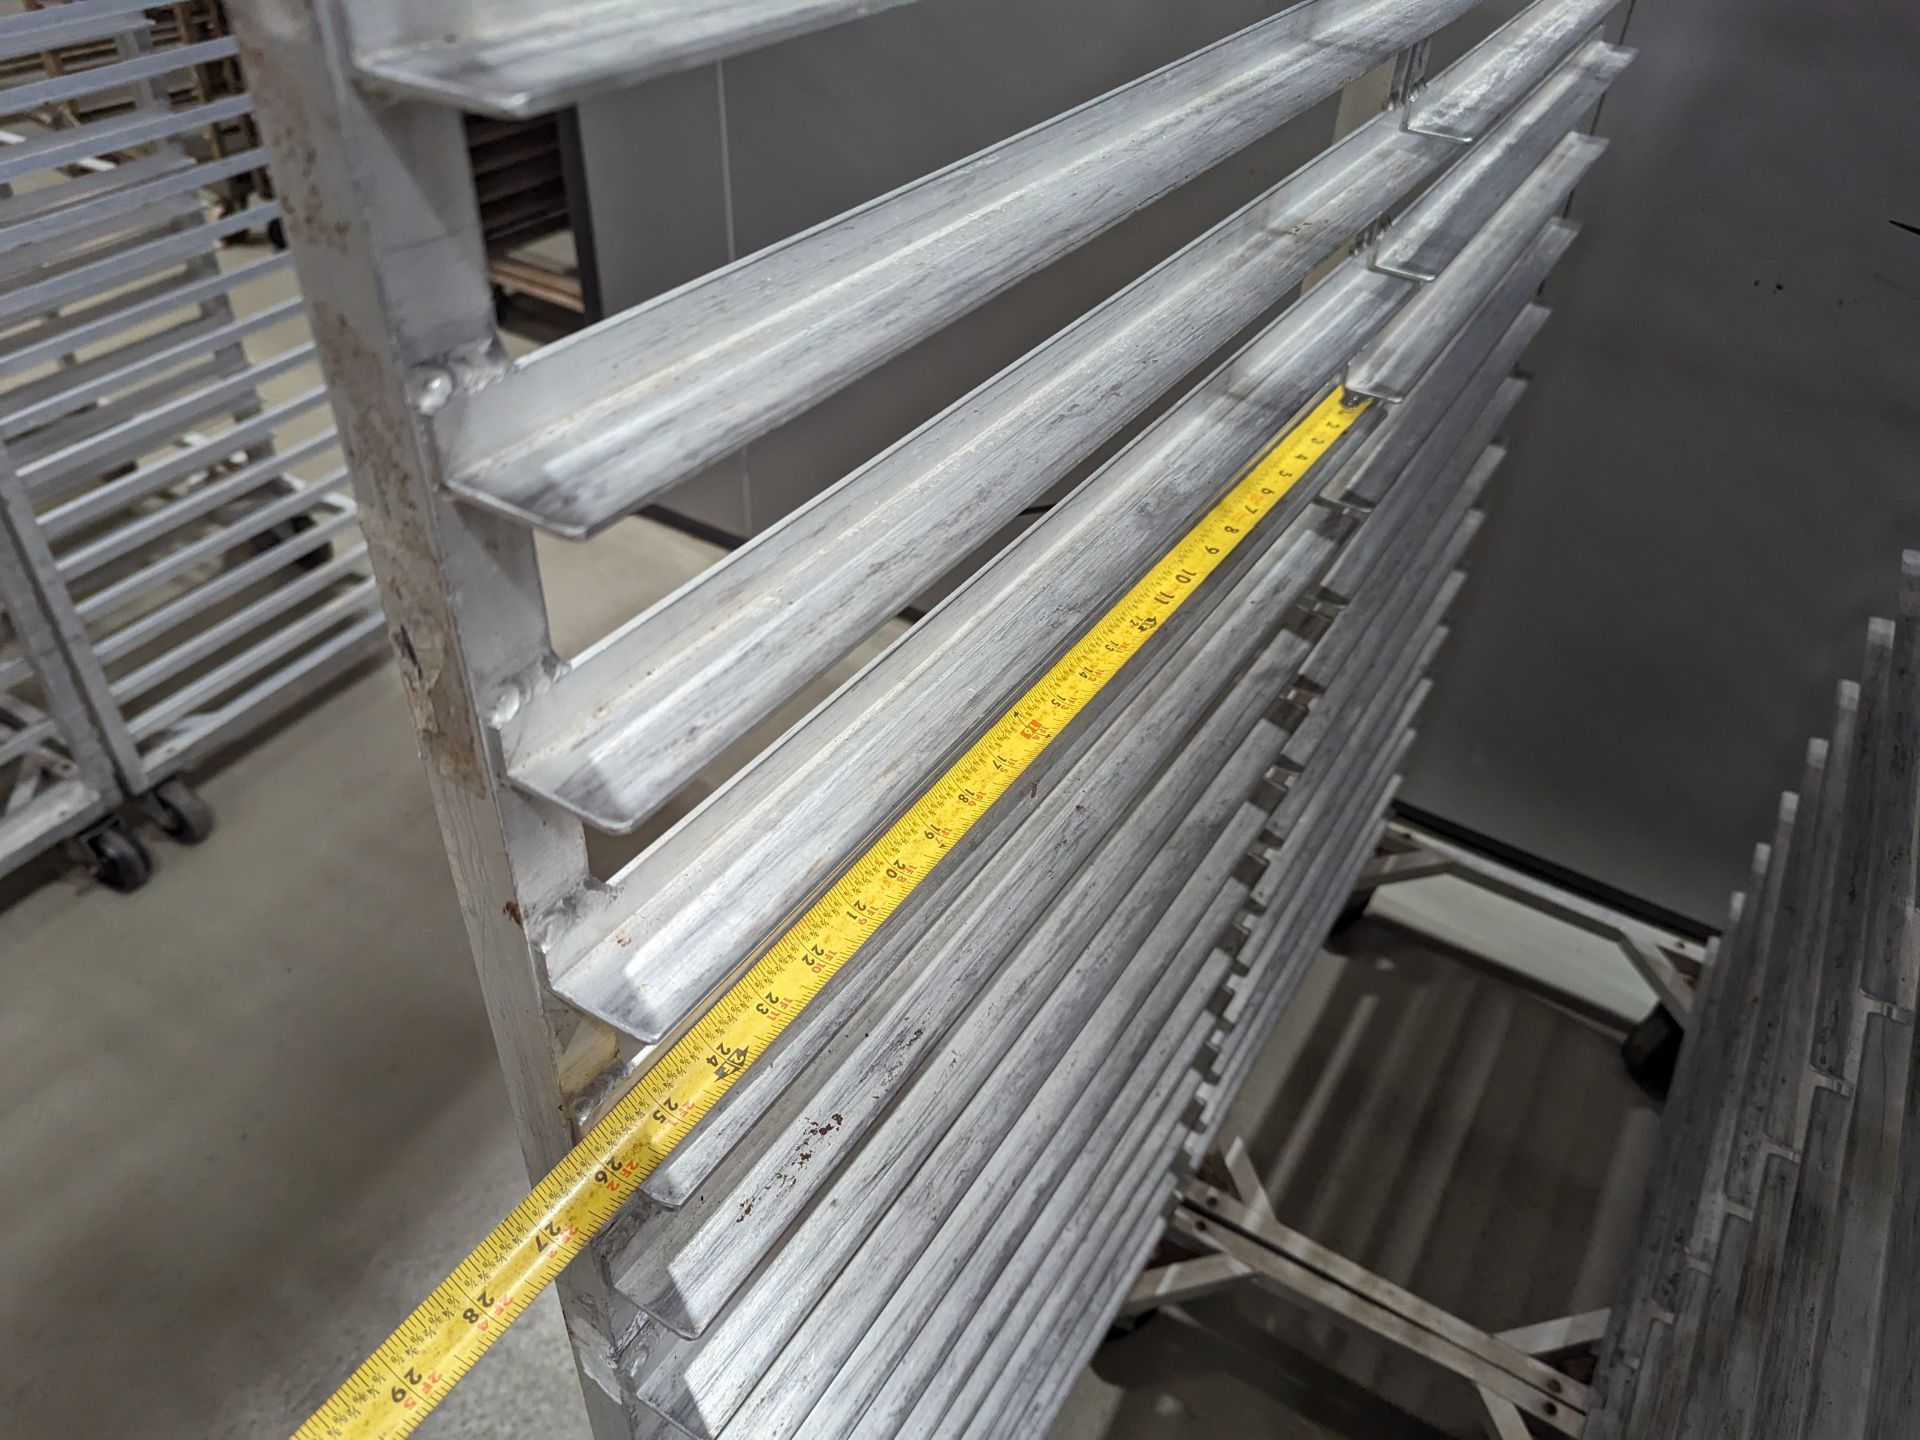 Lot of 4 Single Wide Aluminum Bakery Racks, Dimensions LxWxH: 53x41x69 Measurements are for lot of - Image 4 of 6